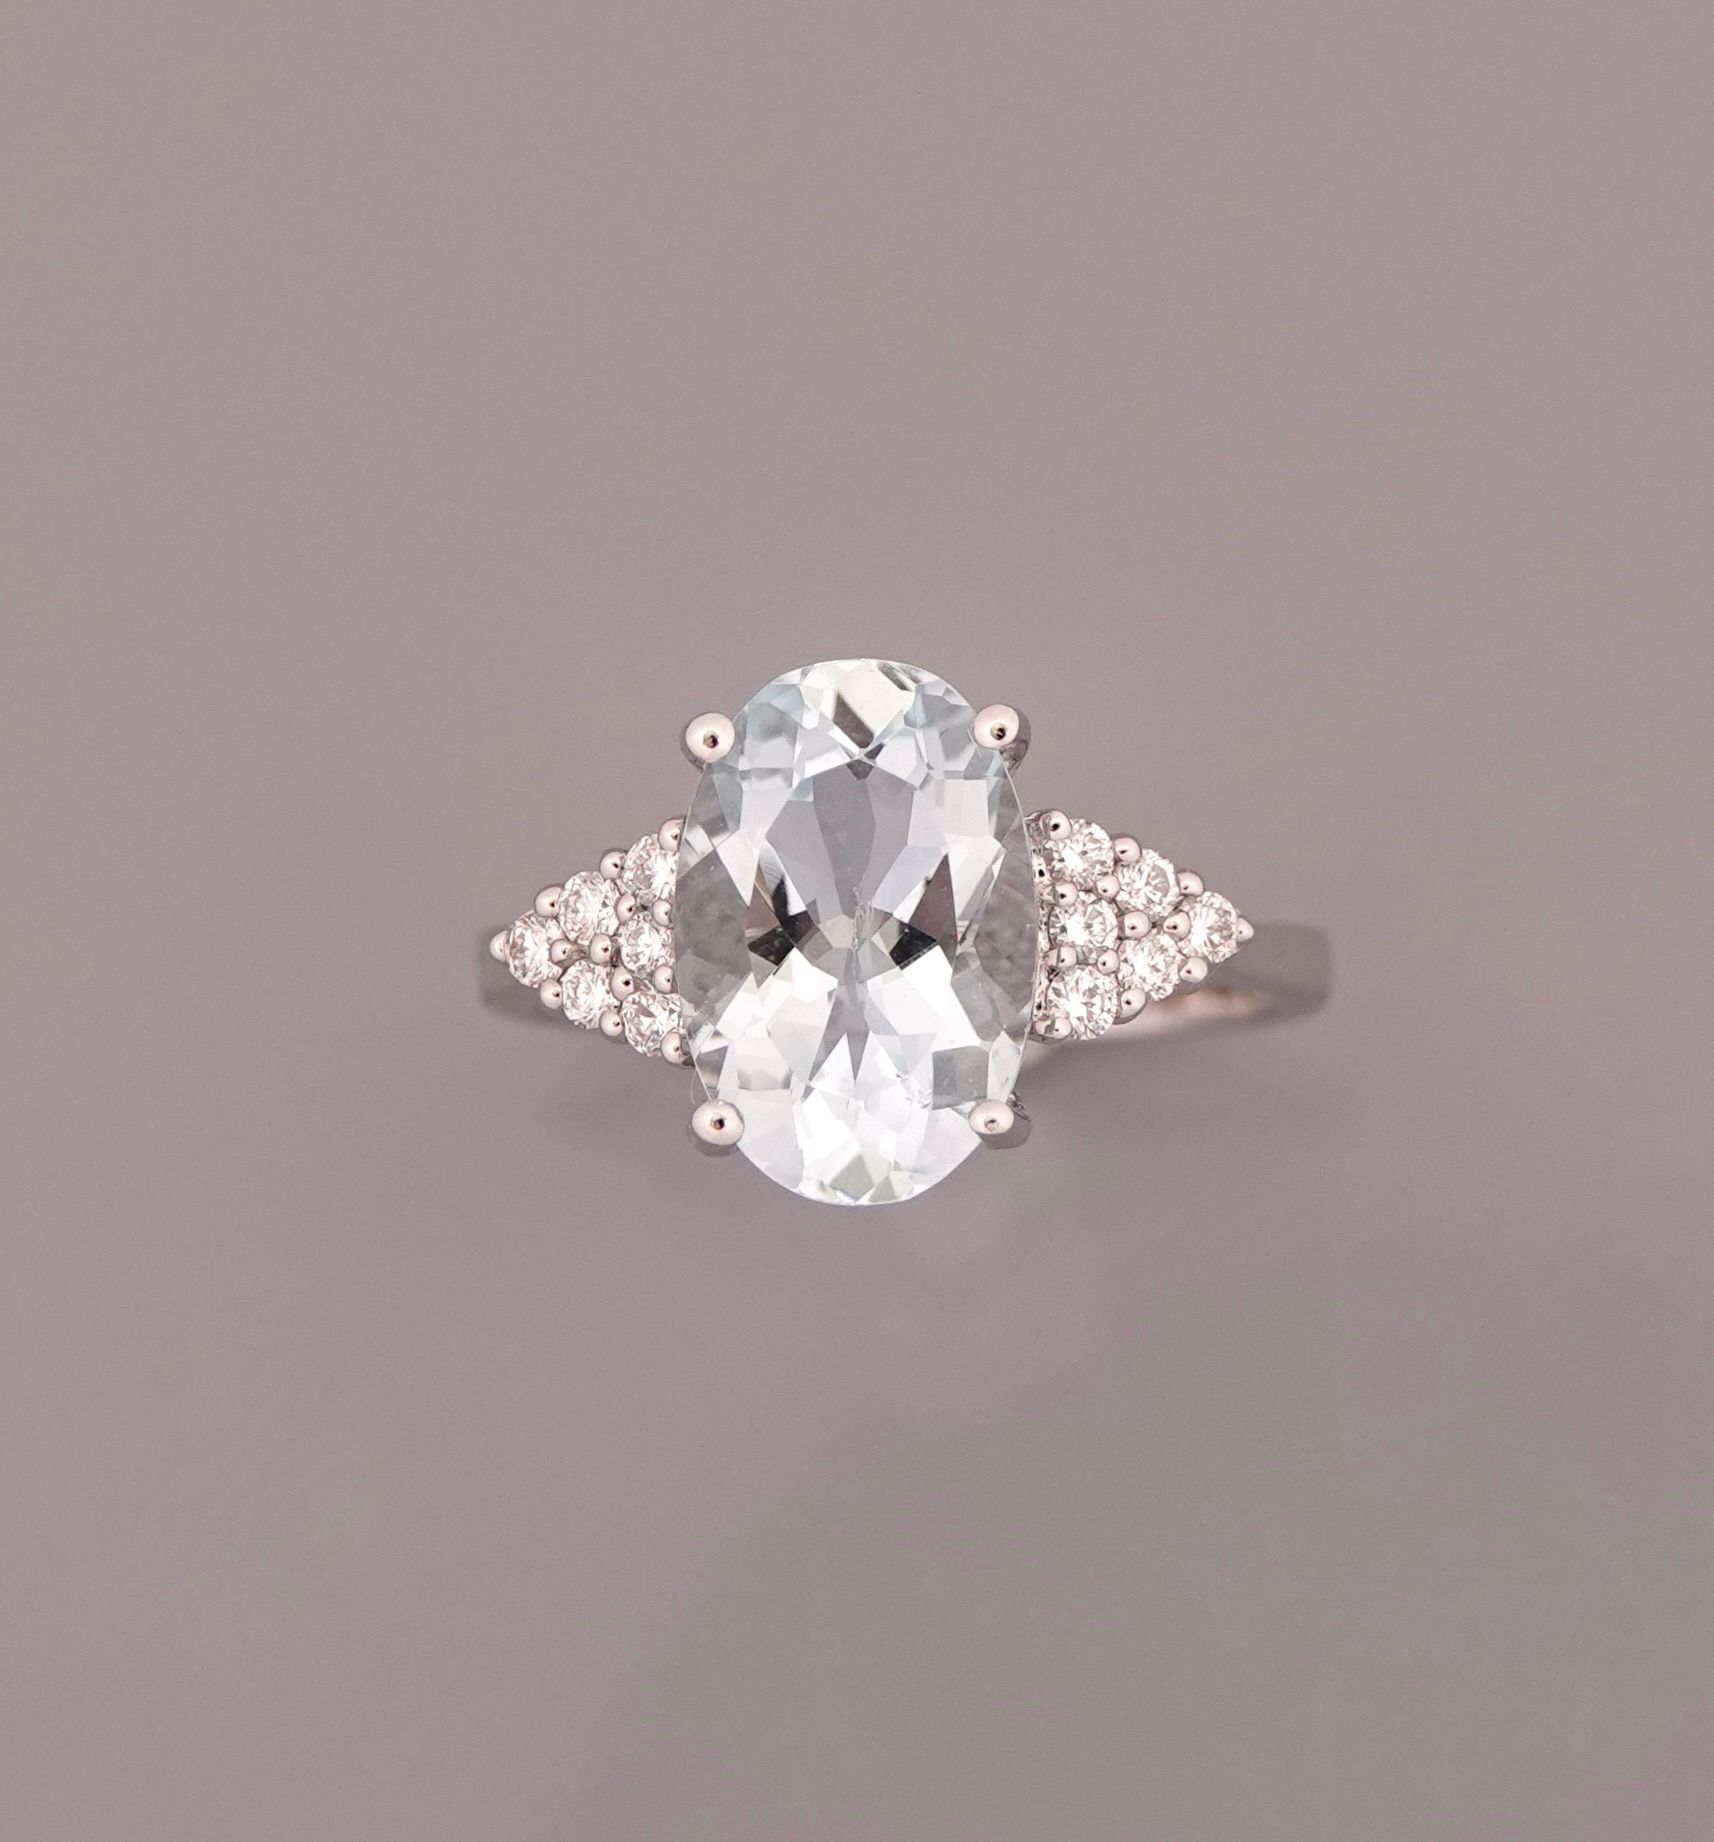 Null Ring in white gold, 750 MM, set with an oval aquamarine weighing 3.15 carat&hellip;